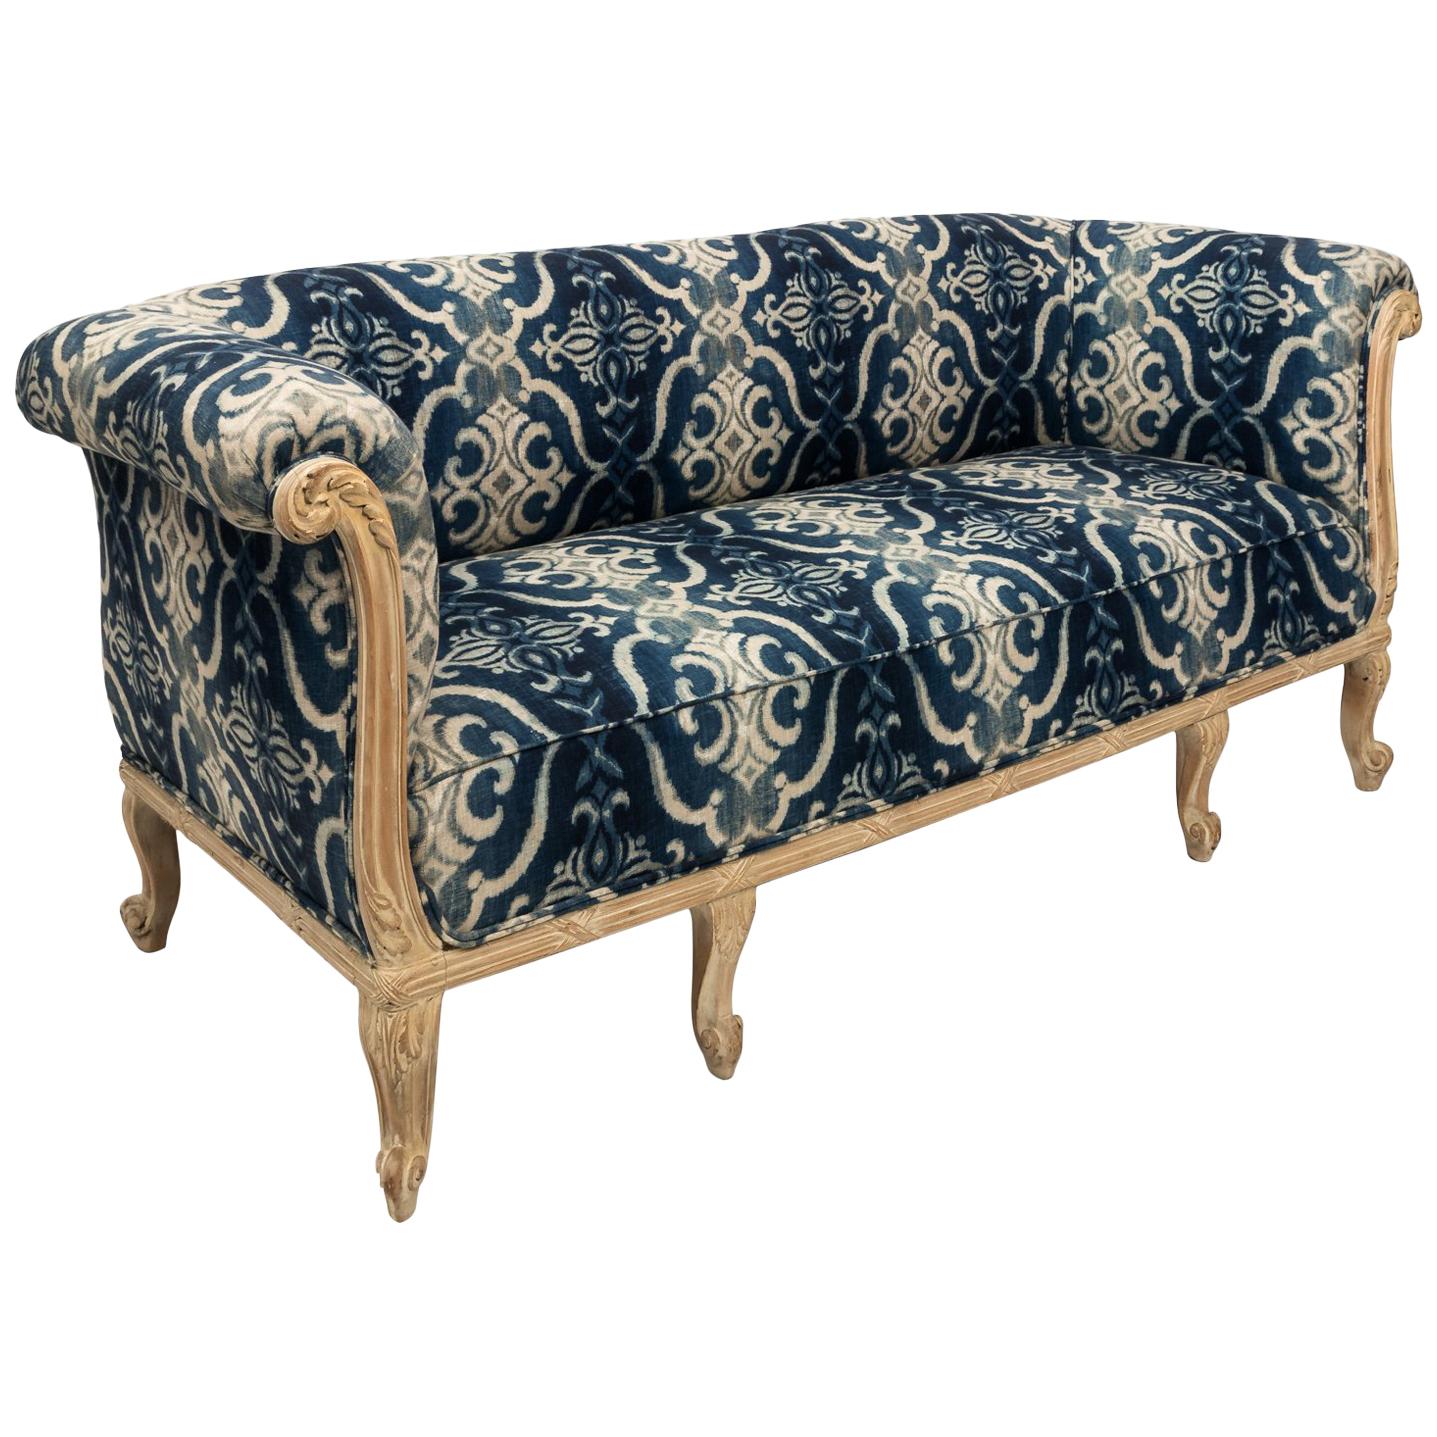 French Chesterfield Sofa with Contemporary Fabric, circa 1870 For Sale